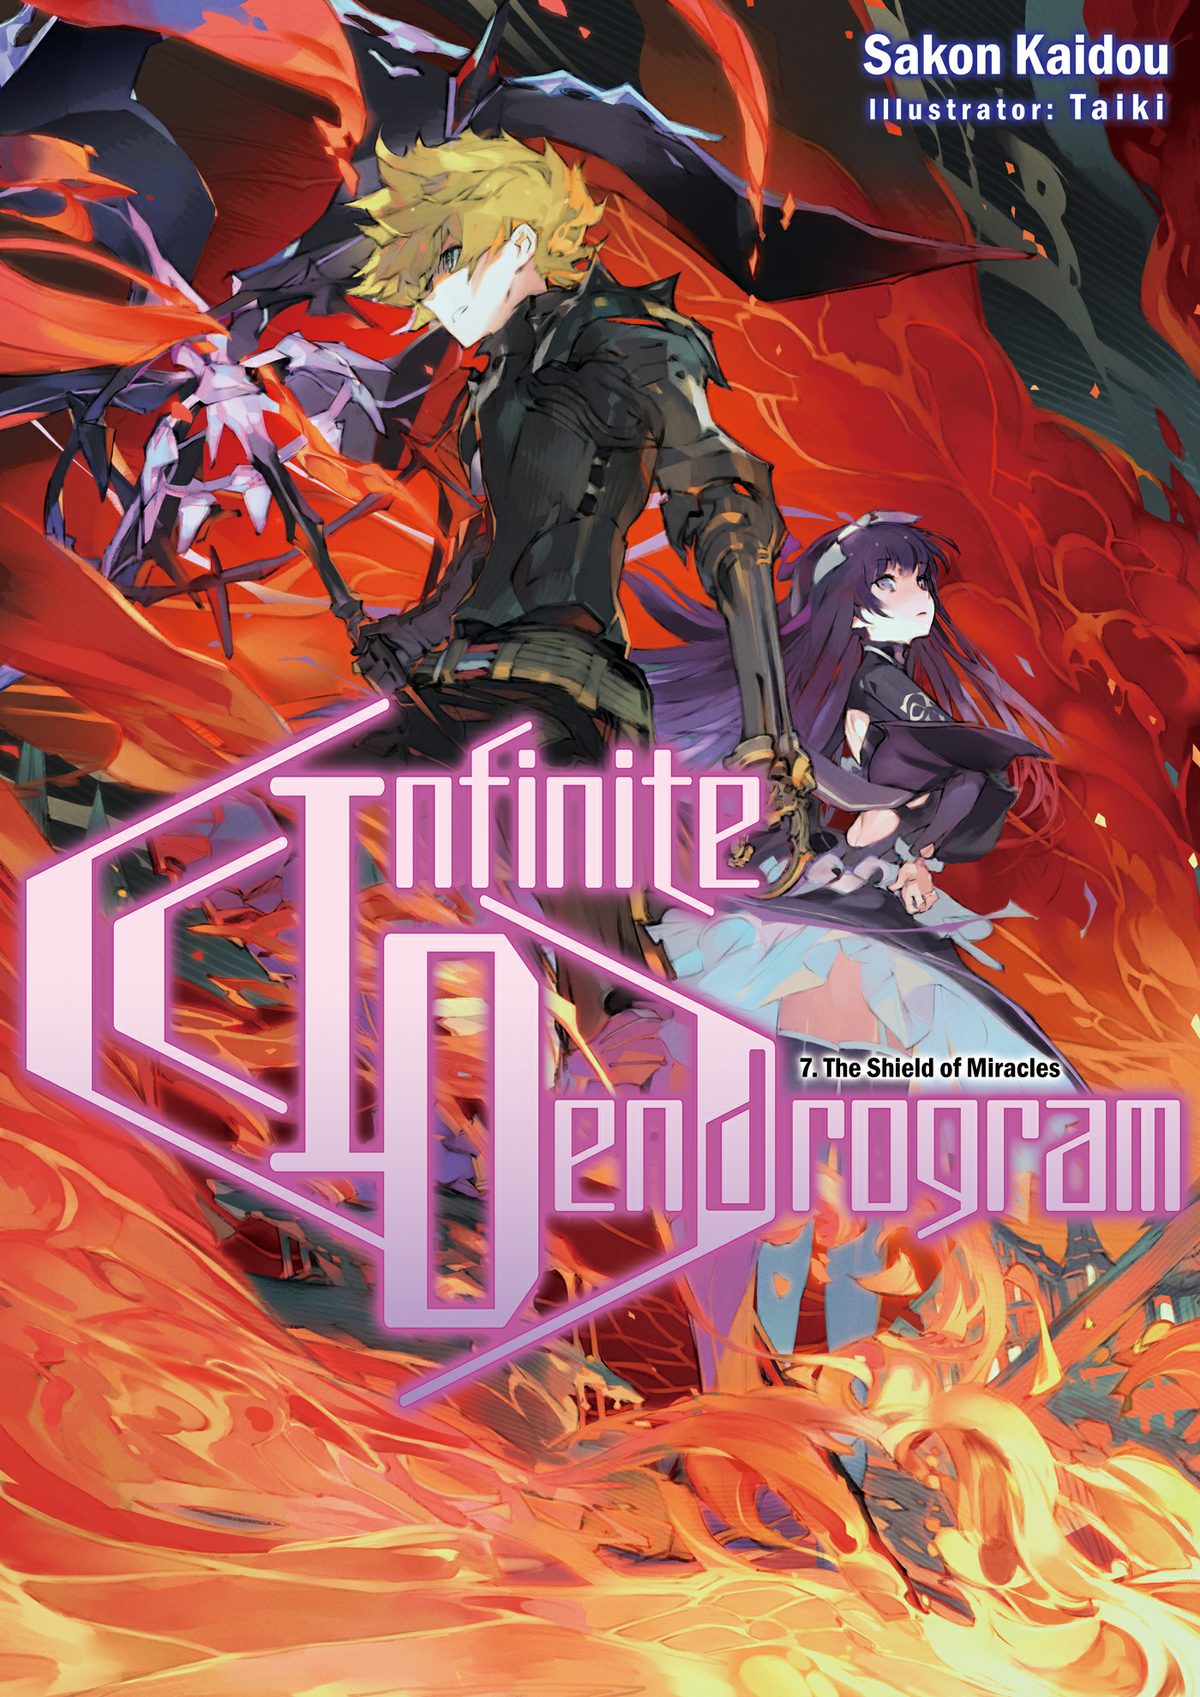 J-Novel Club - Gear up for some more awesome art in the manga adaptation of Infinite  Dendrogram! Infinite Dendrogram (Manga) Vol. 7 Chapter 1 is up now for  your reading pleasure on